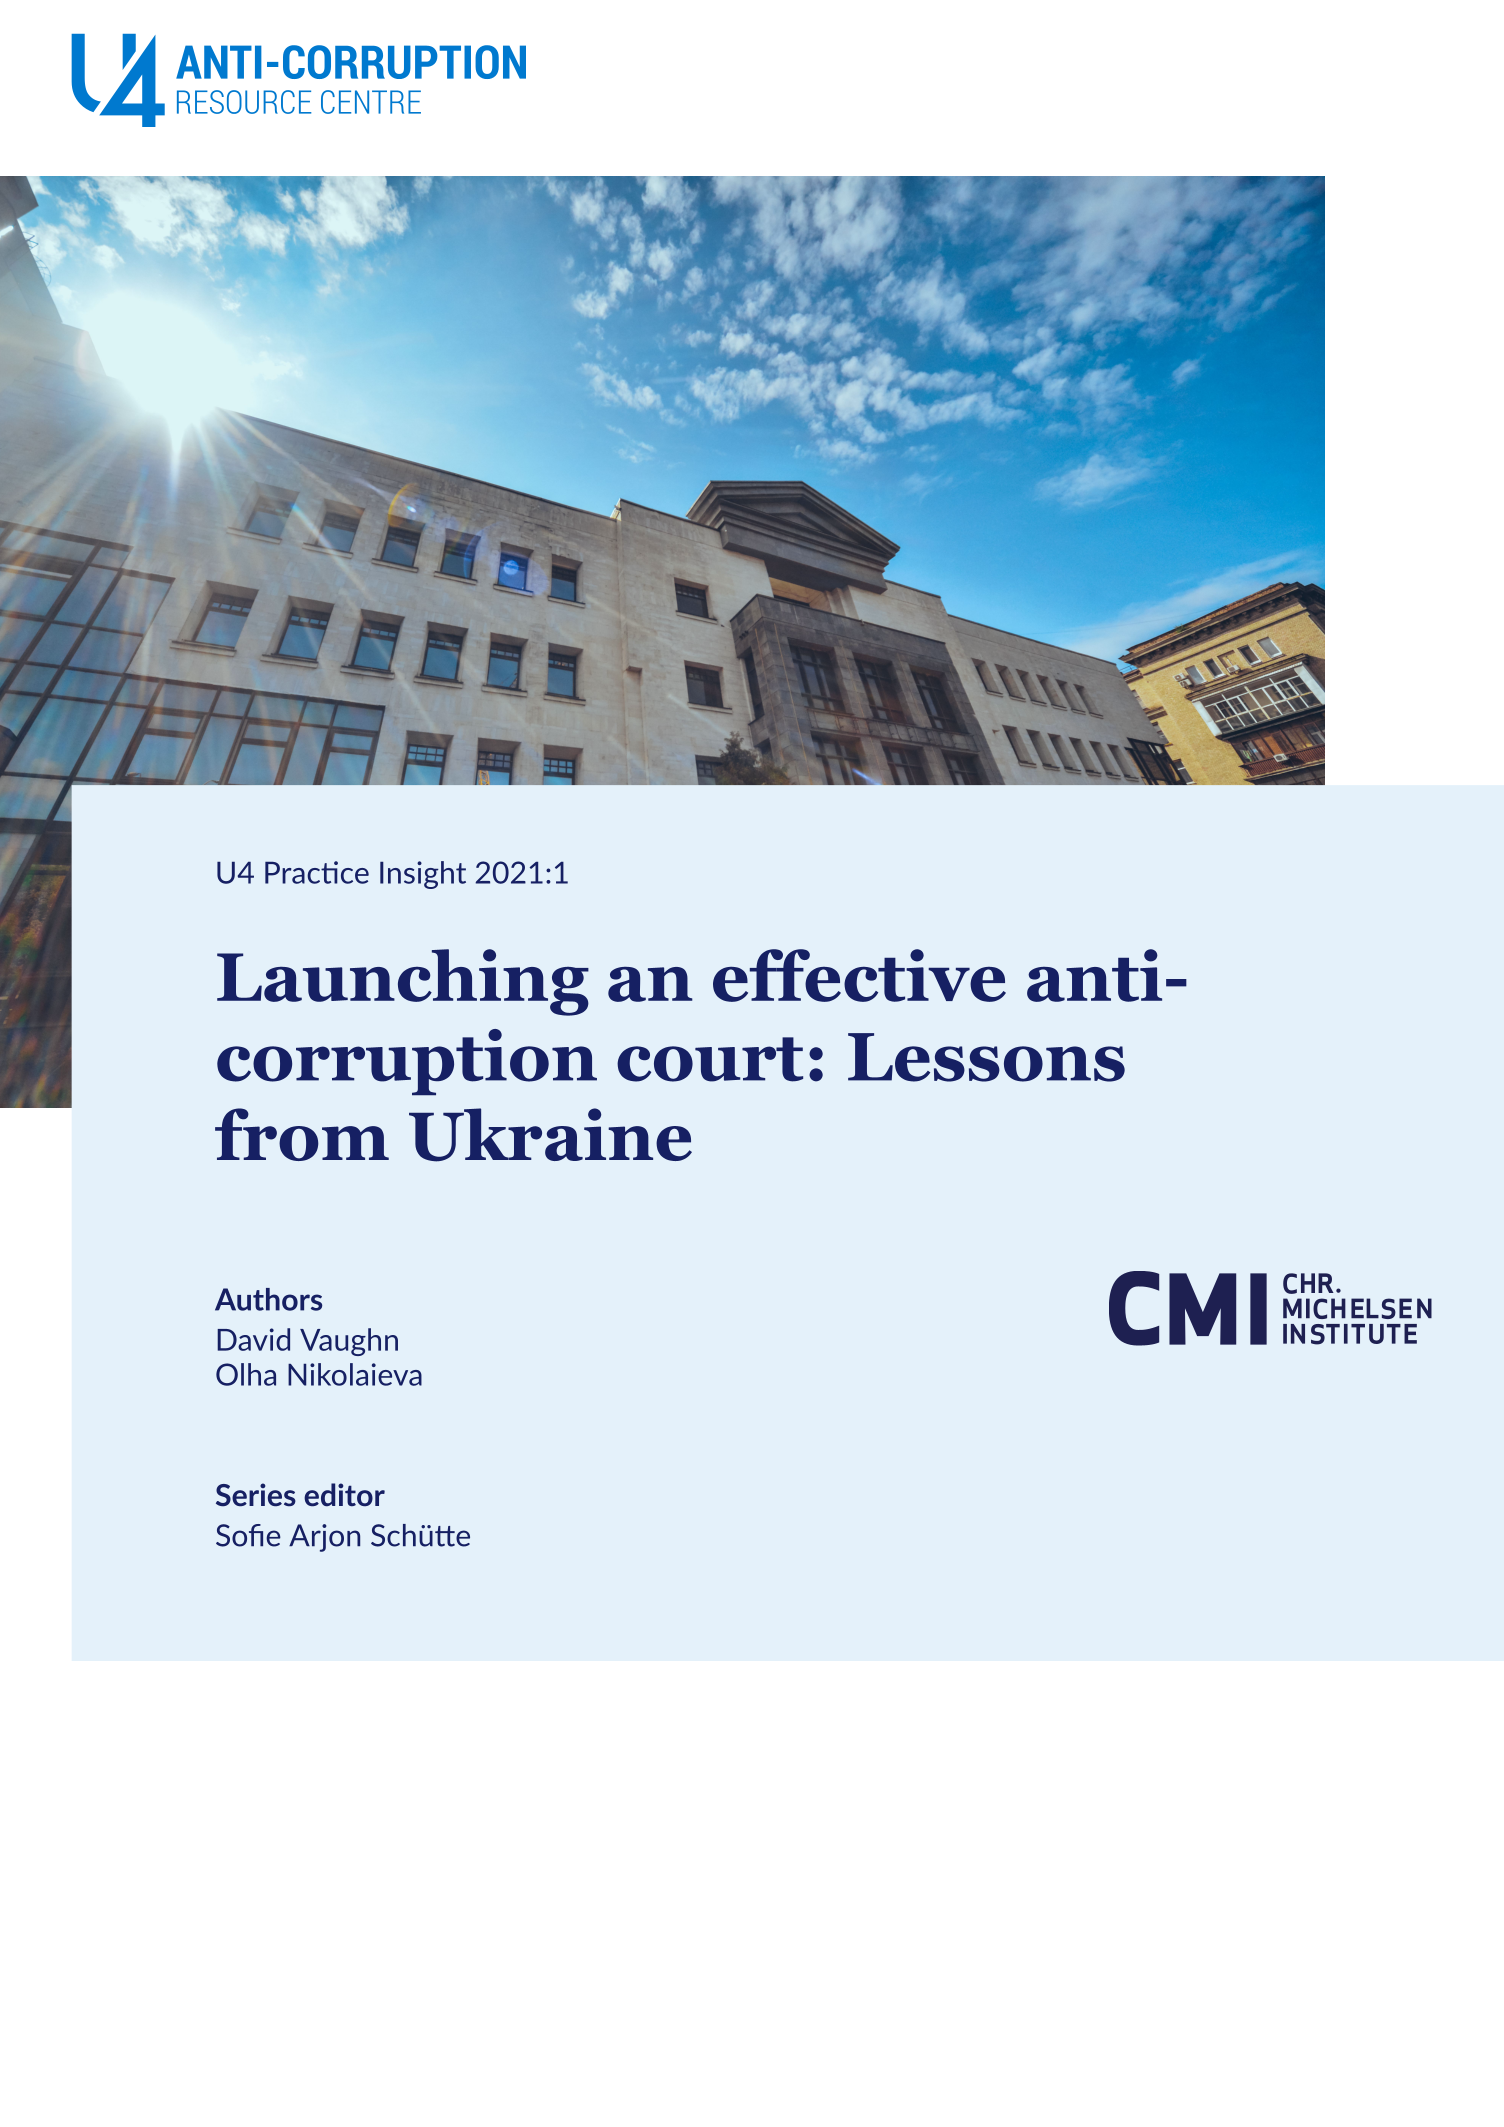 Launching an effective anti-corruption court: Lessons from Ukraine